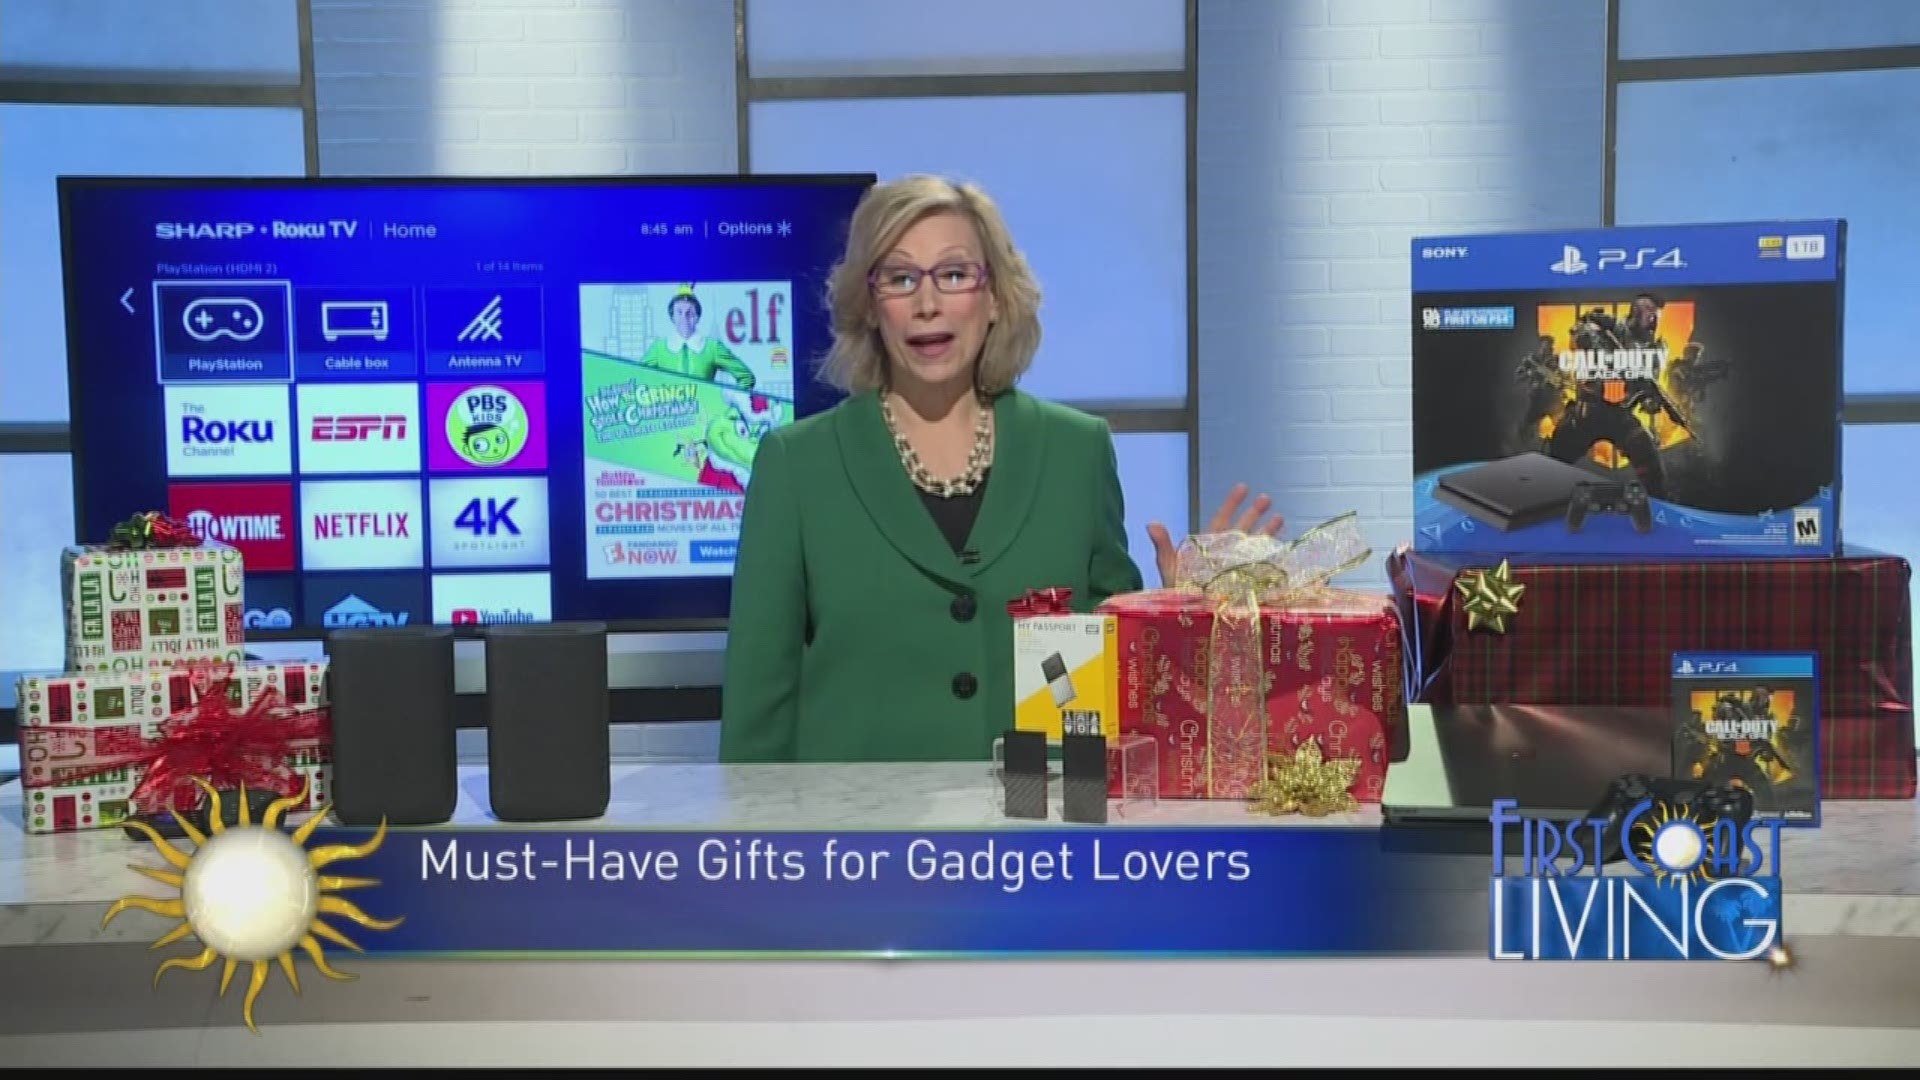 Looking for some great tech gifts for this holiday season? Check these out!